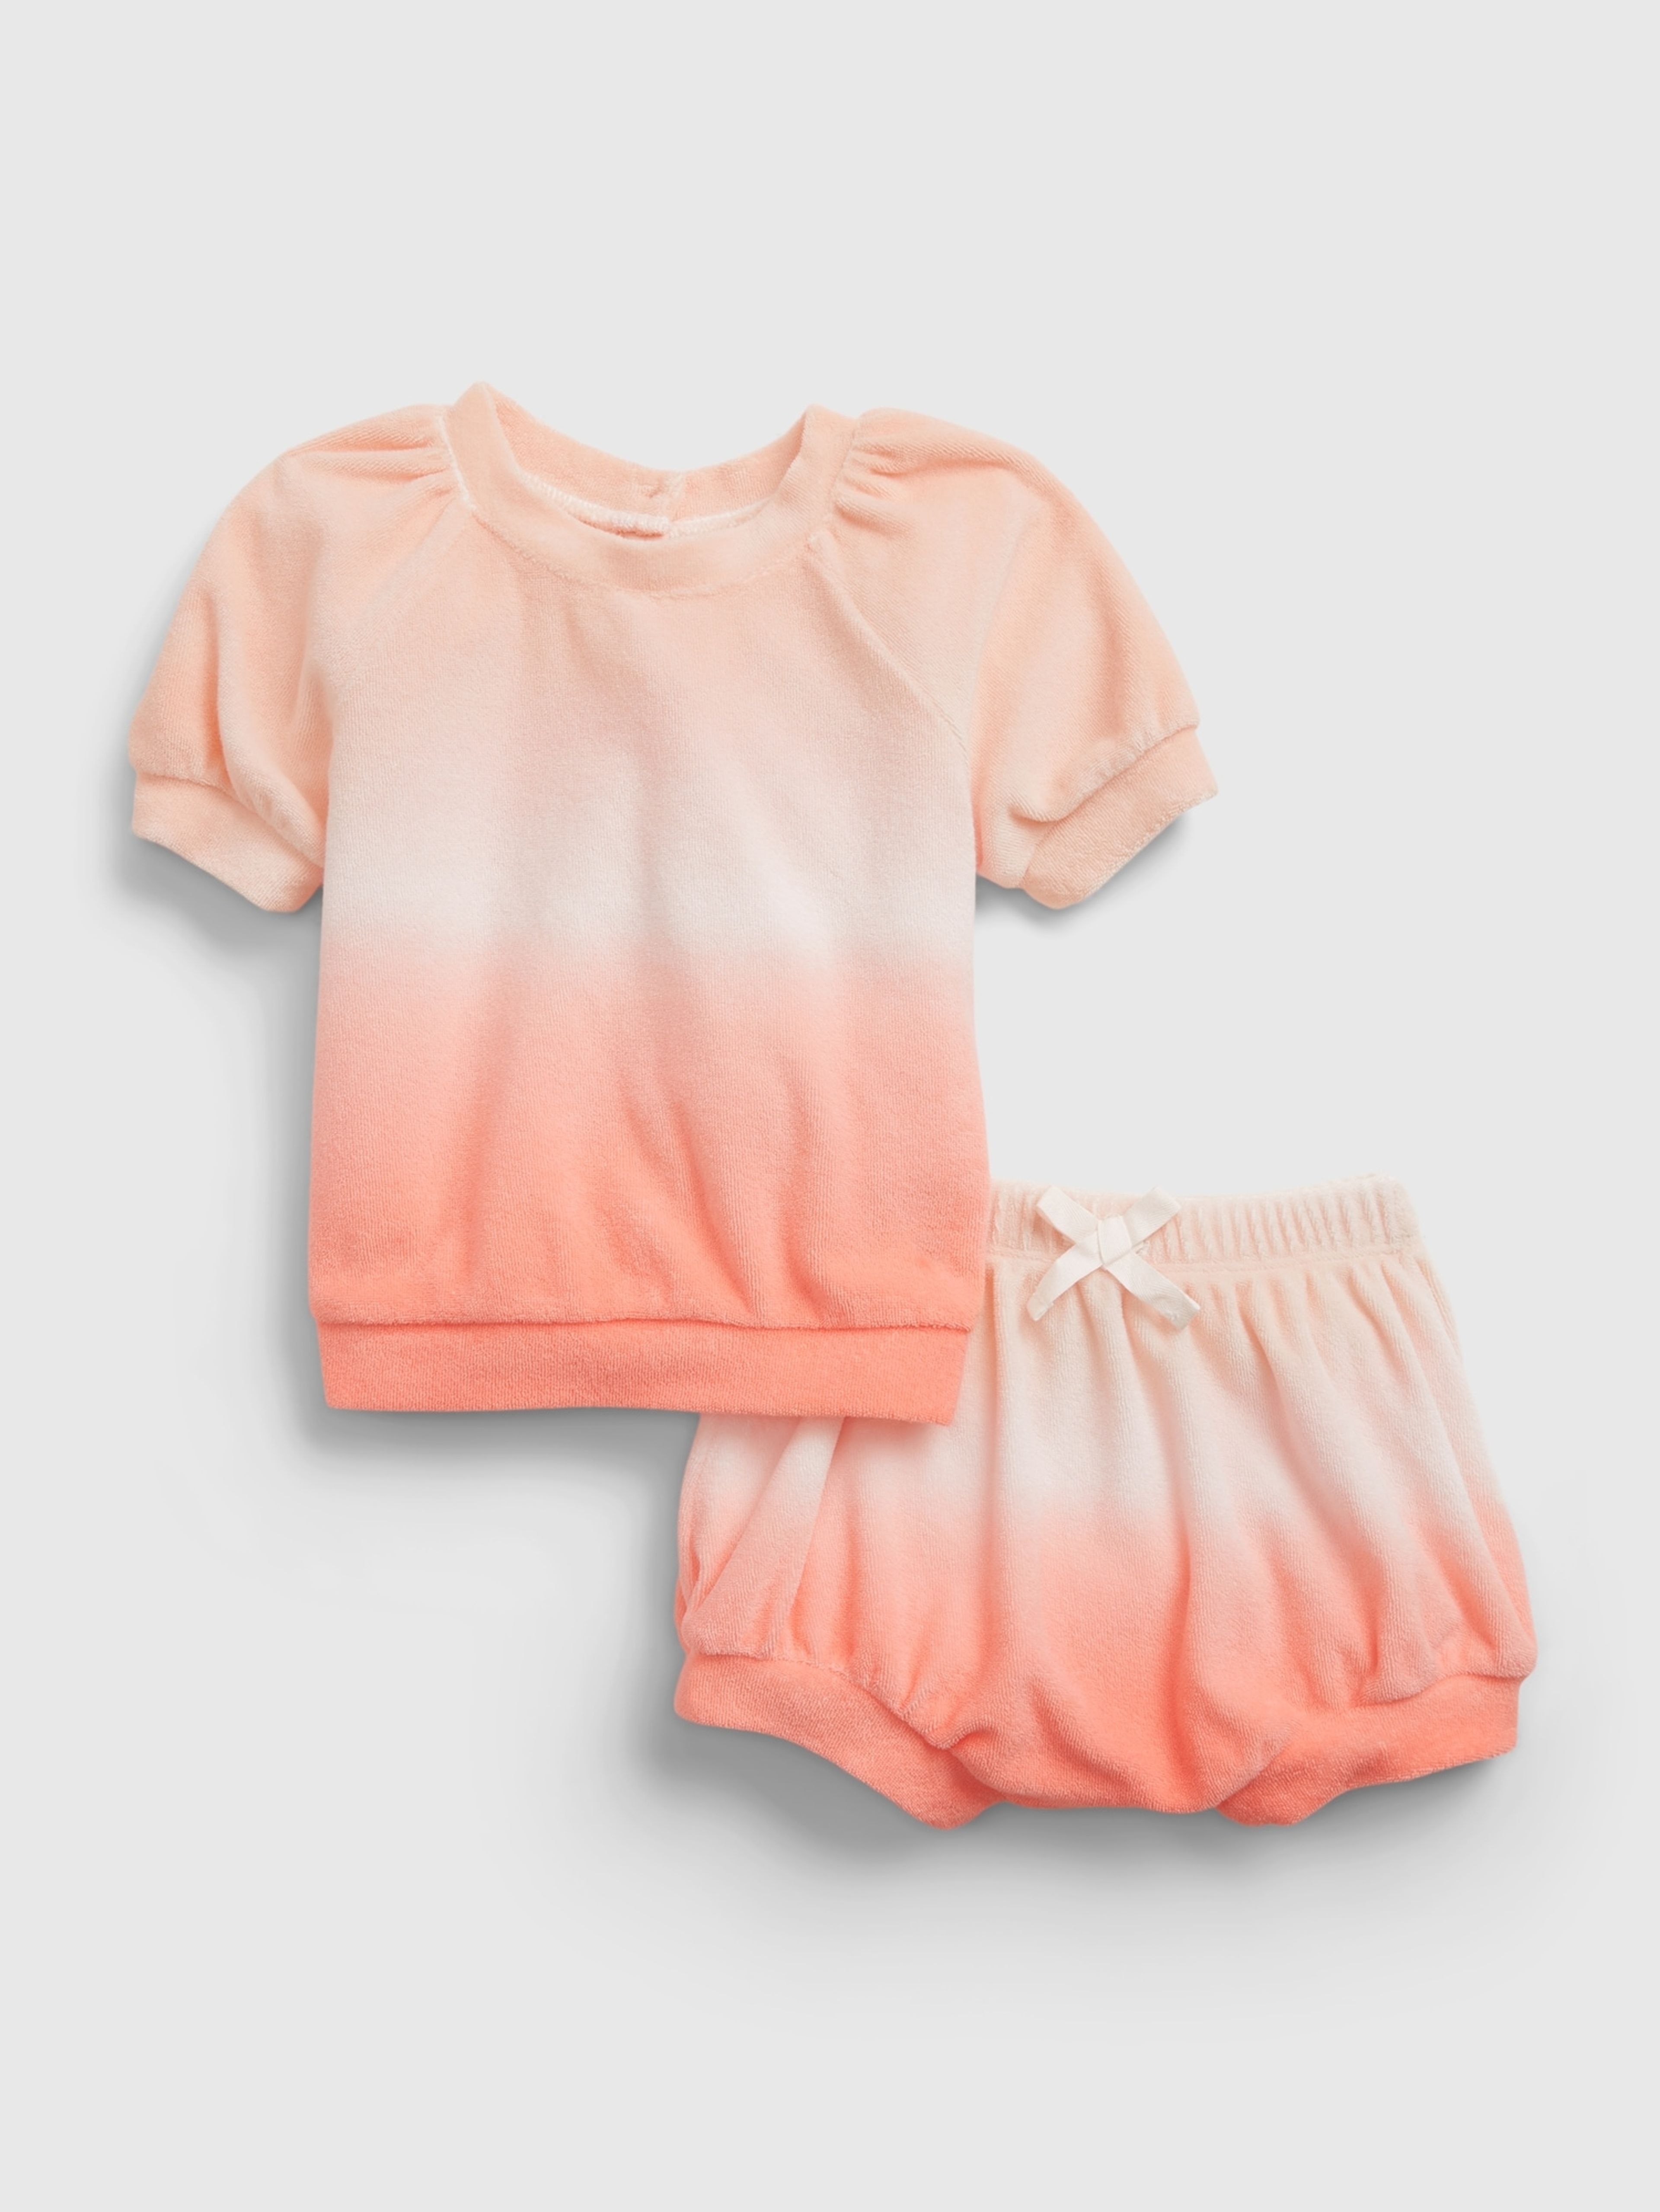 Baby komplet outfit